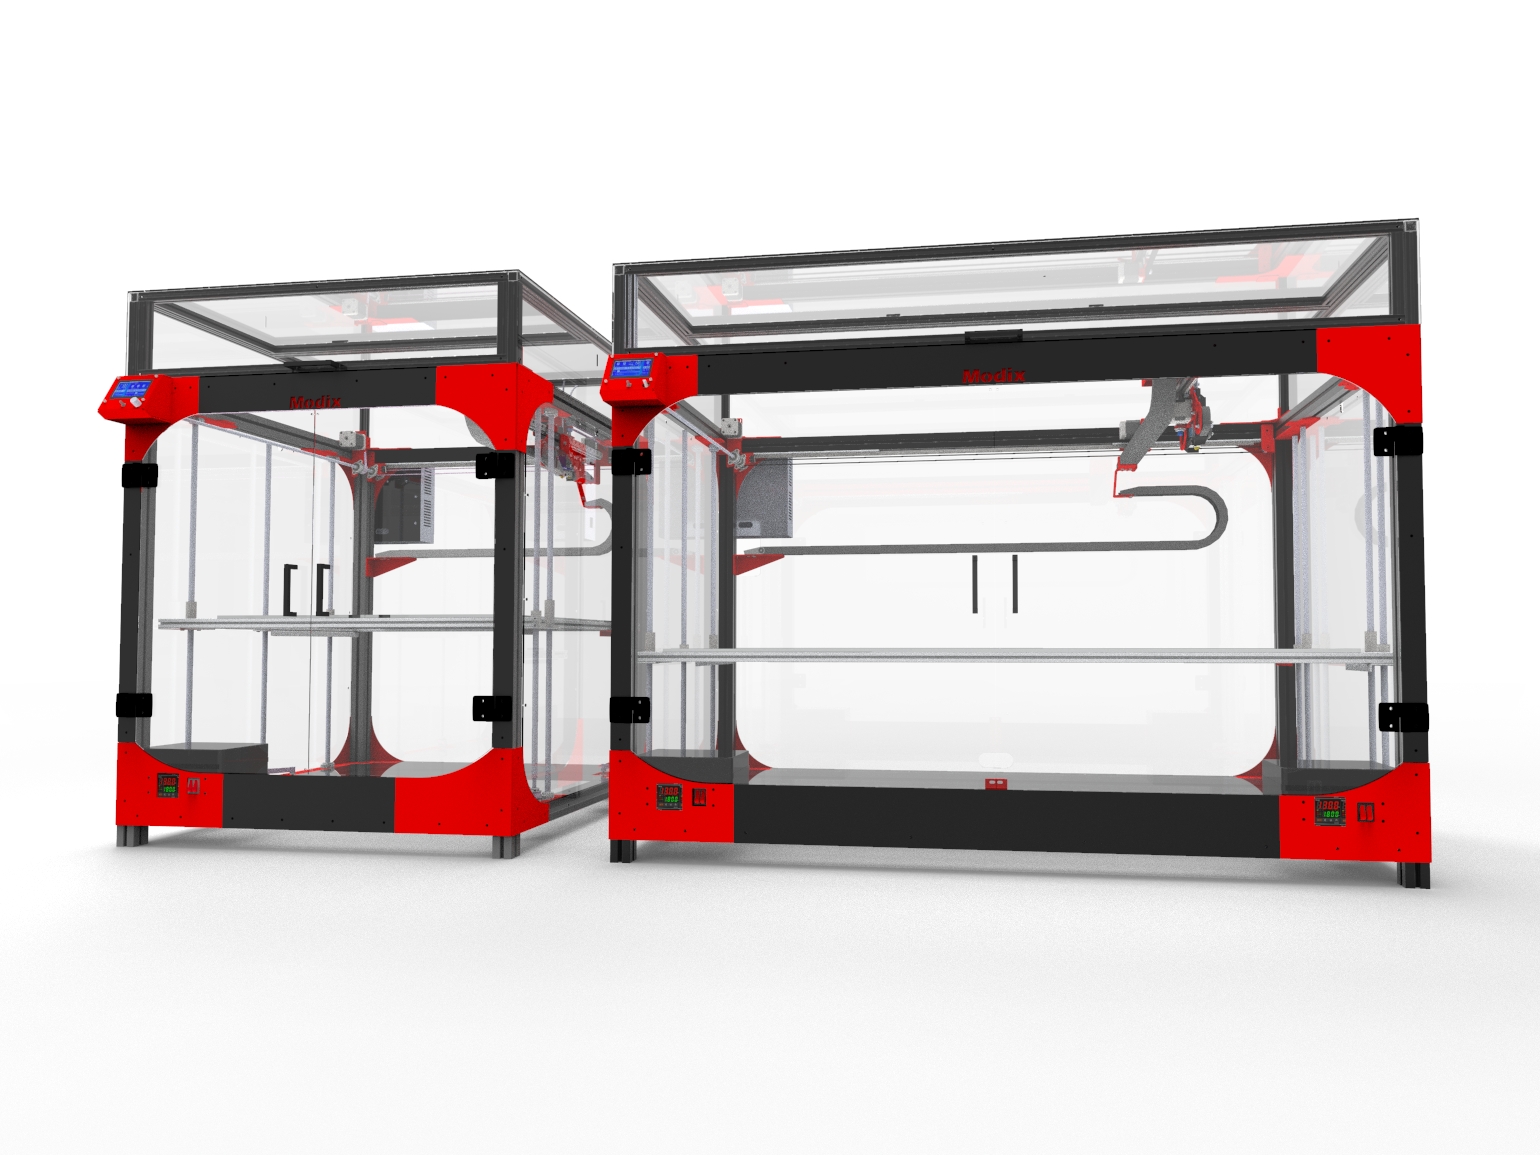 Postbode distillatie Ben depressief Modix Releases Latest Large Format Self-Assembly 3D Printer - 3DPrint.com |  The Voice of 3D Printing / Additive Manufacturing